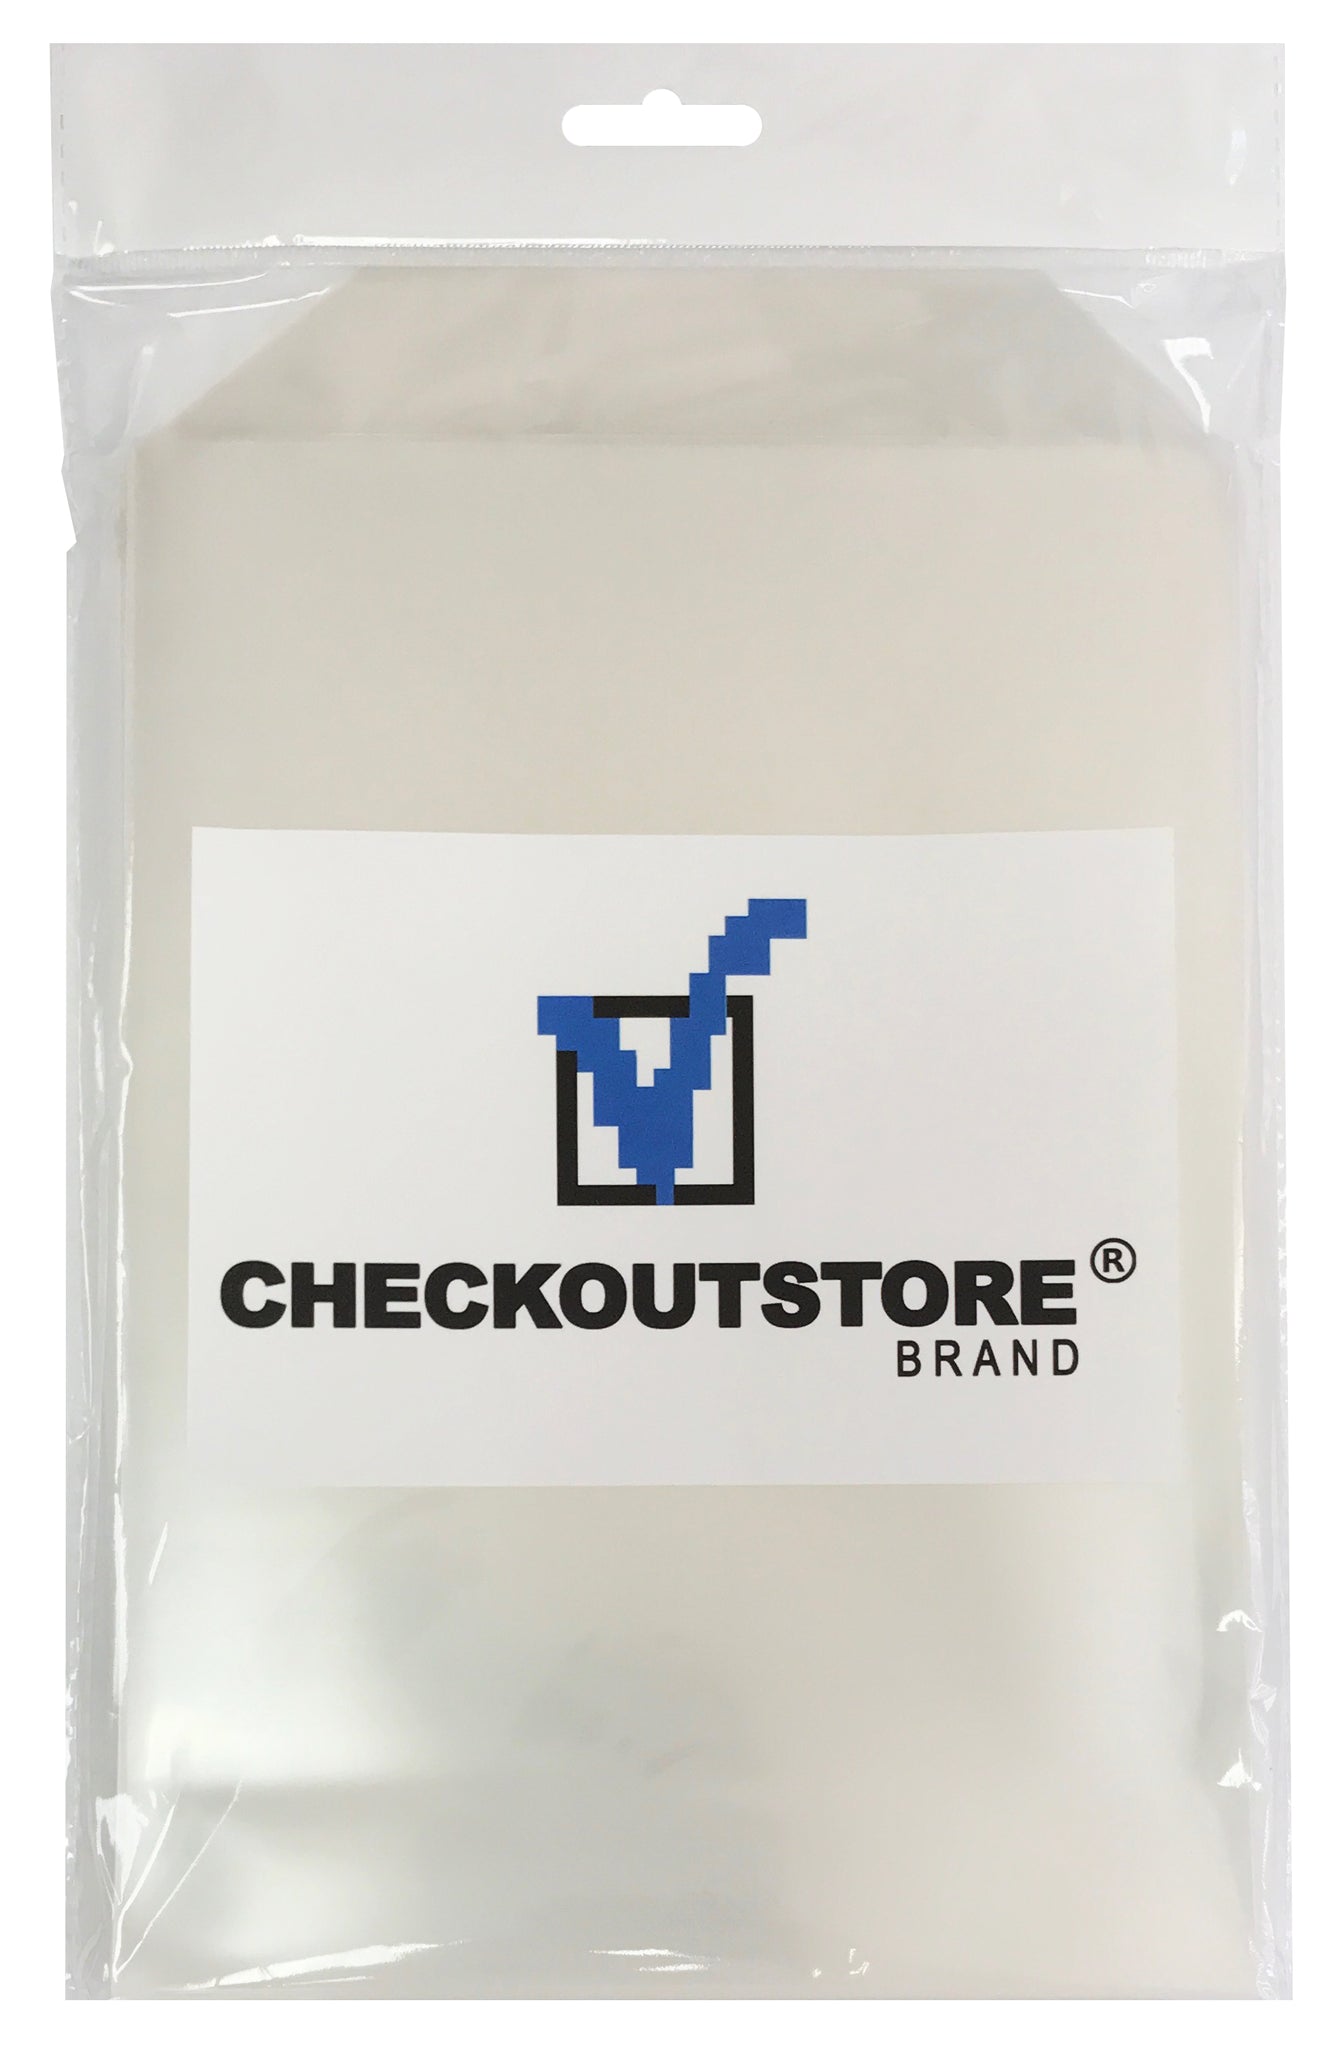 CheckOutStore Cardstock Clear Storage Pockets No Flap (12 3/4 x 13) –